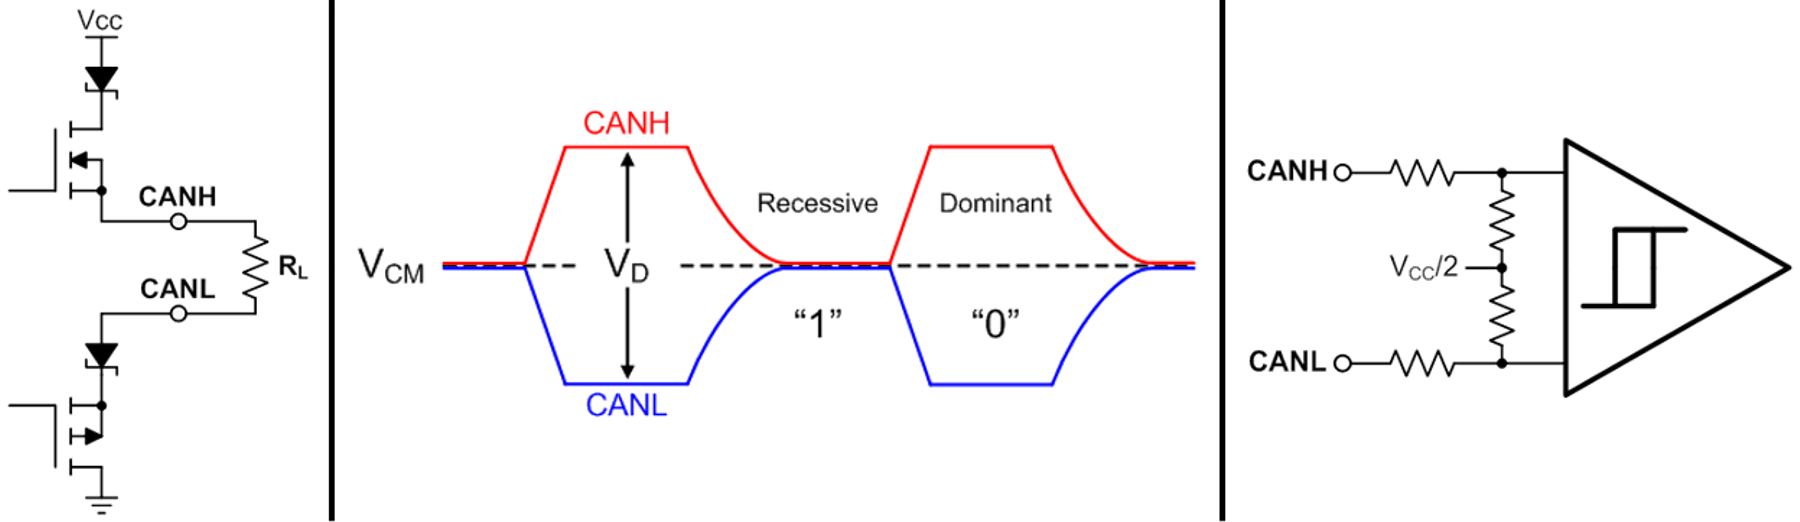  CAN Signaling, Diver and
                    Receiver Representation